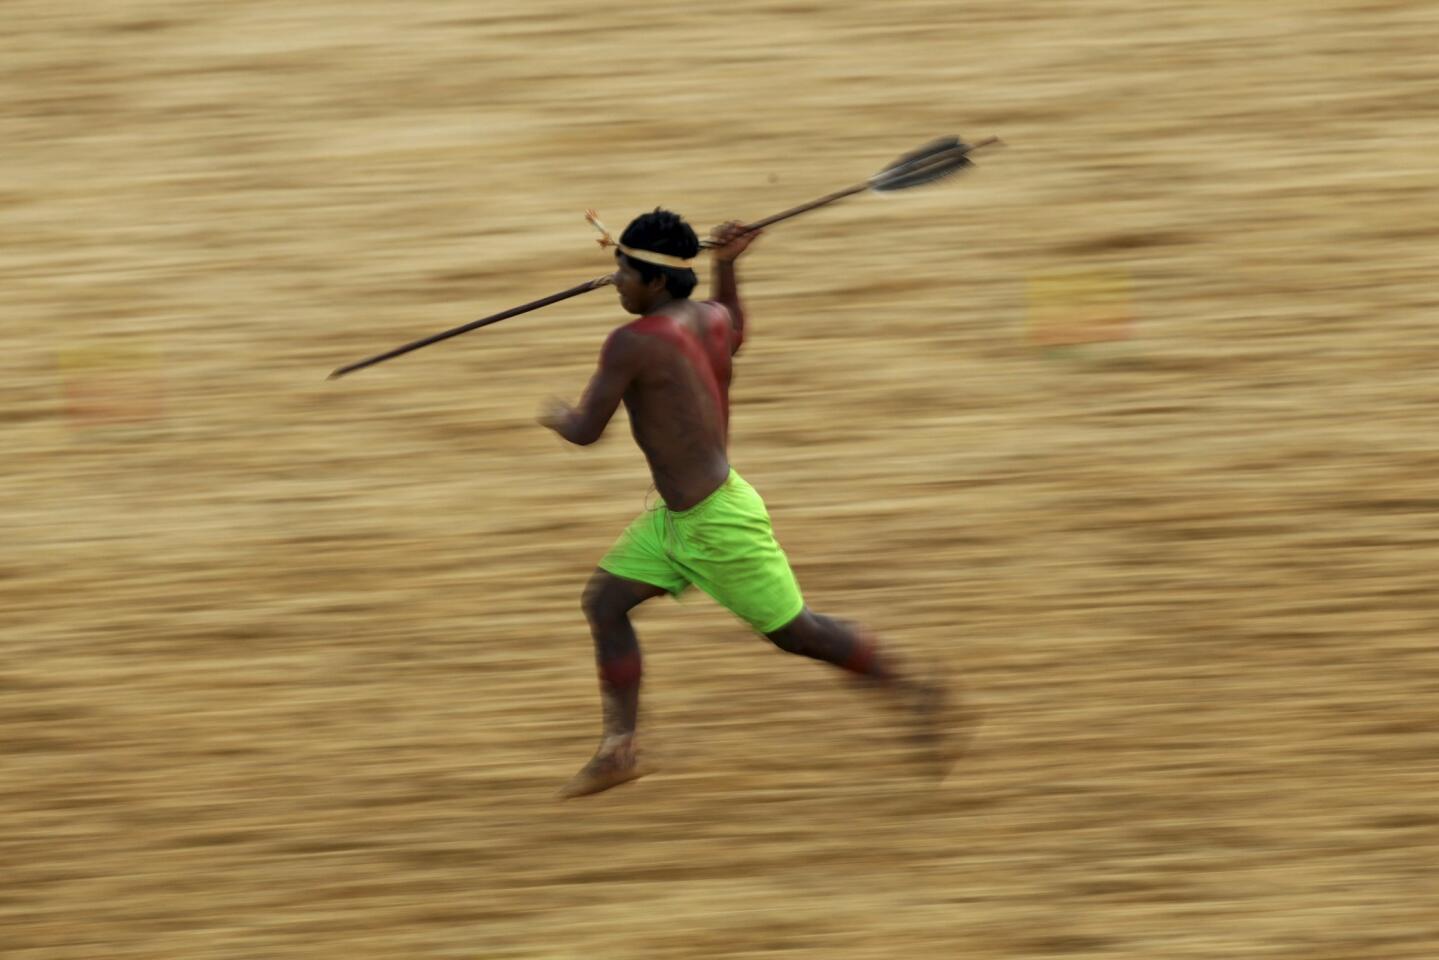 An indigenous man from the Kanela tribe competes in a spear-throwing competition during the first World Games for Indigenous Peoples in Palmas